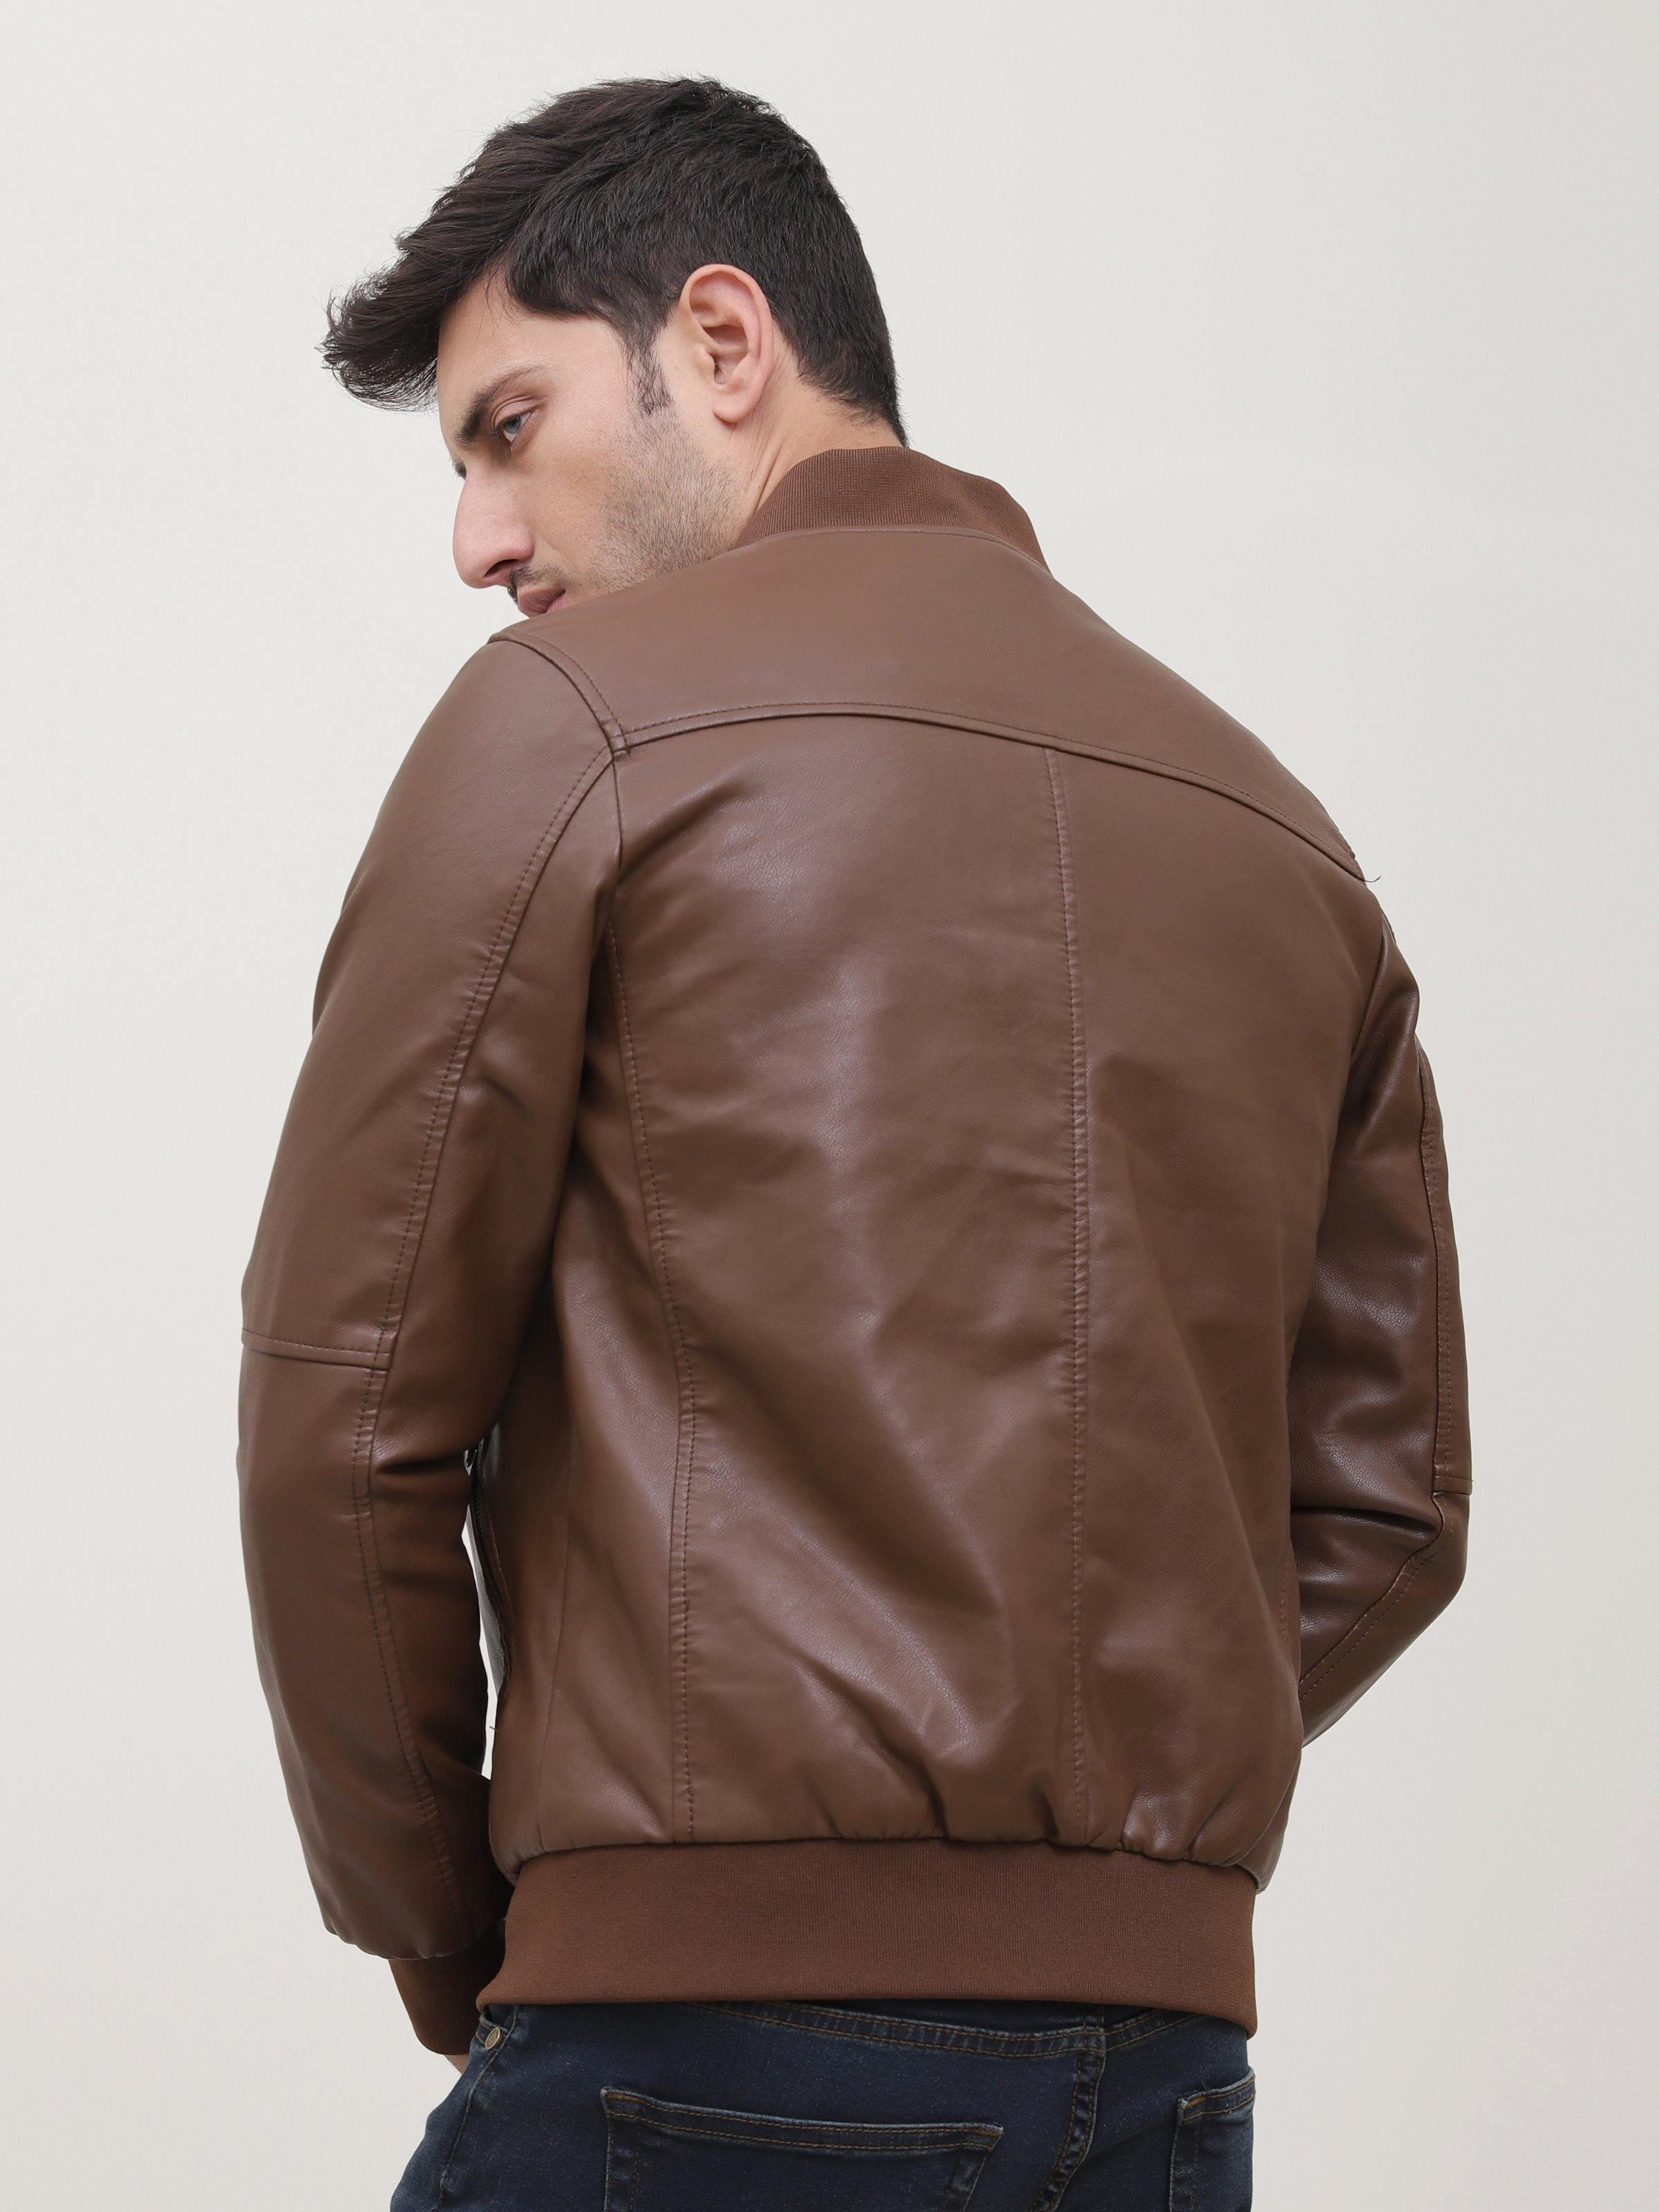 JACKET FULL SLEEVE PU LEATHER BROWN at Charcoal Clothing